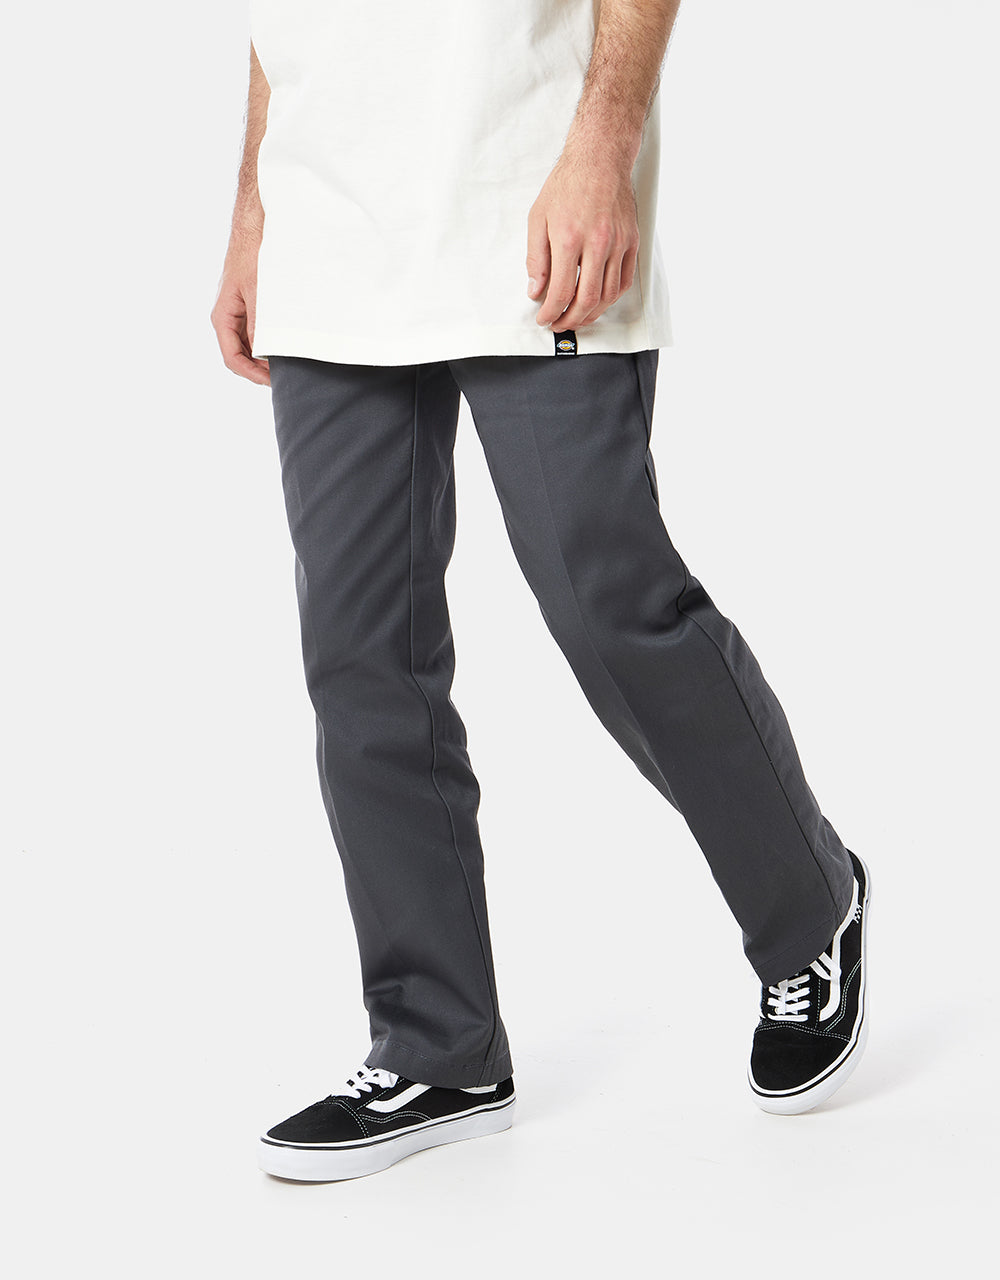 Dickies 874 Recycled Work Pant - Charcoal Grey